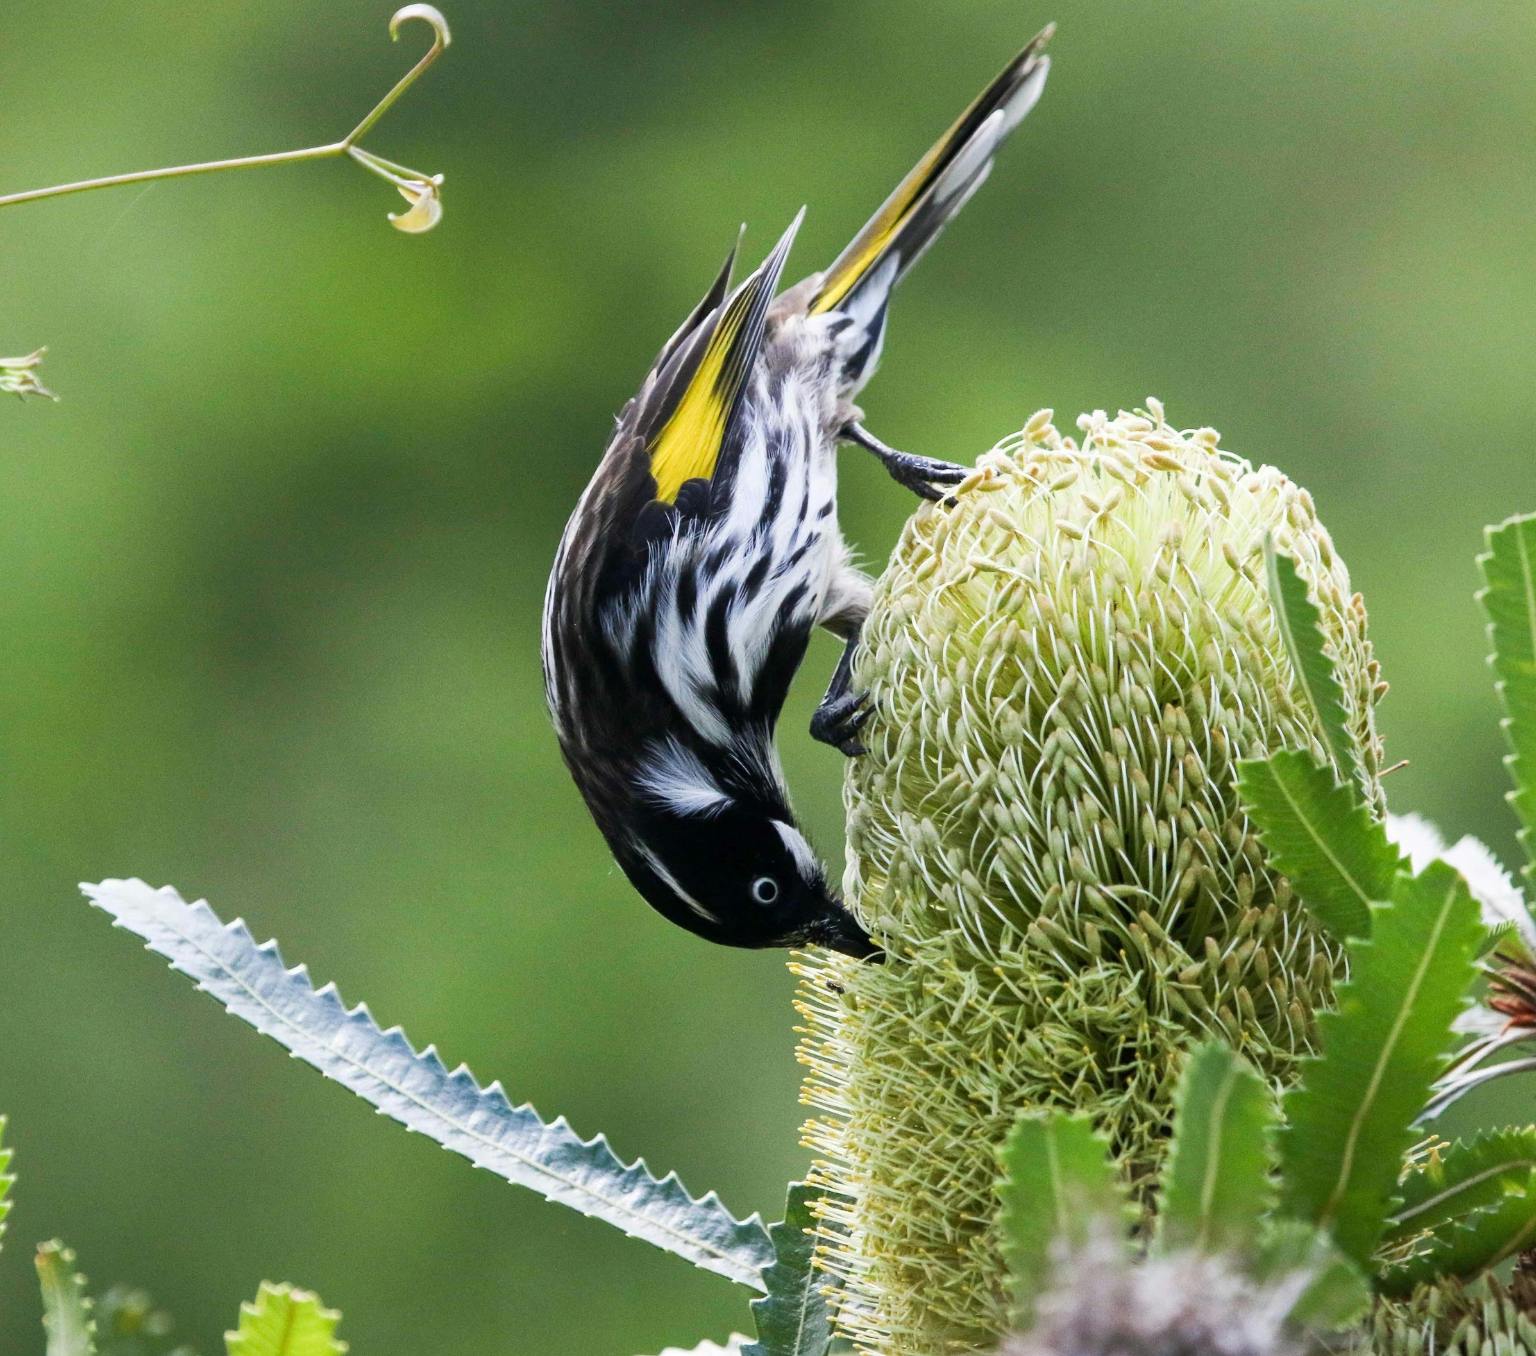 bird with yellow, black and white feathers is eating from a green banksia flower